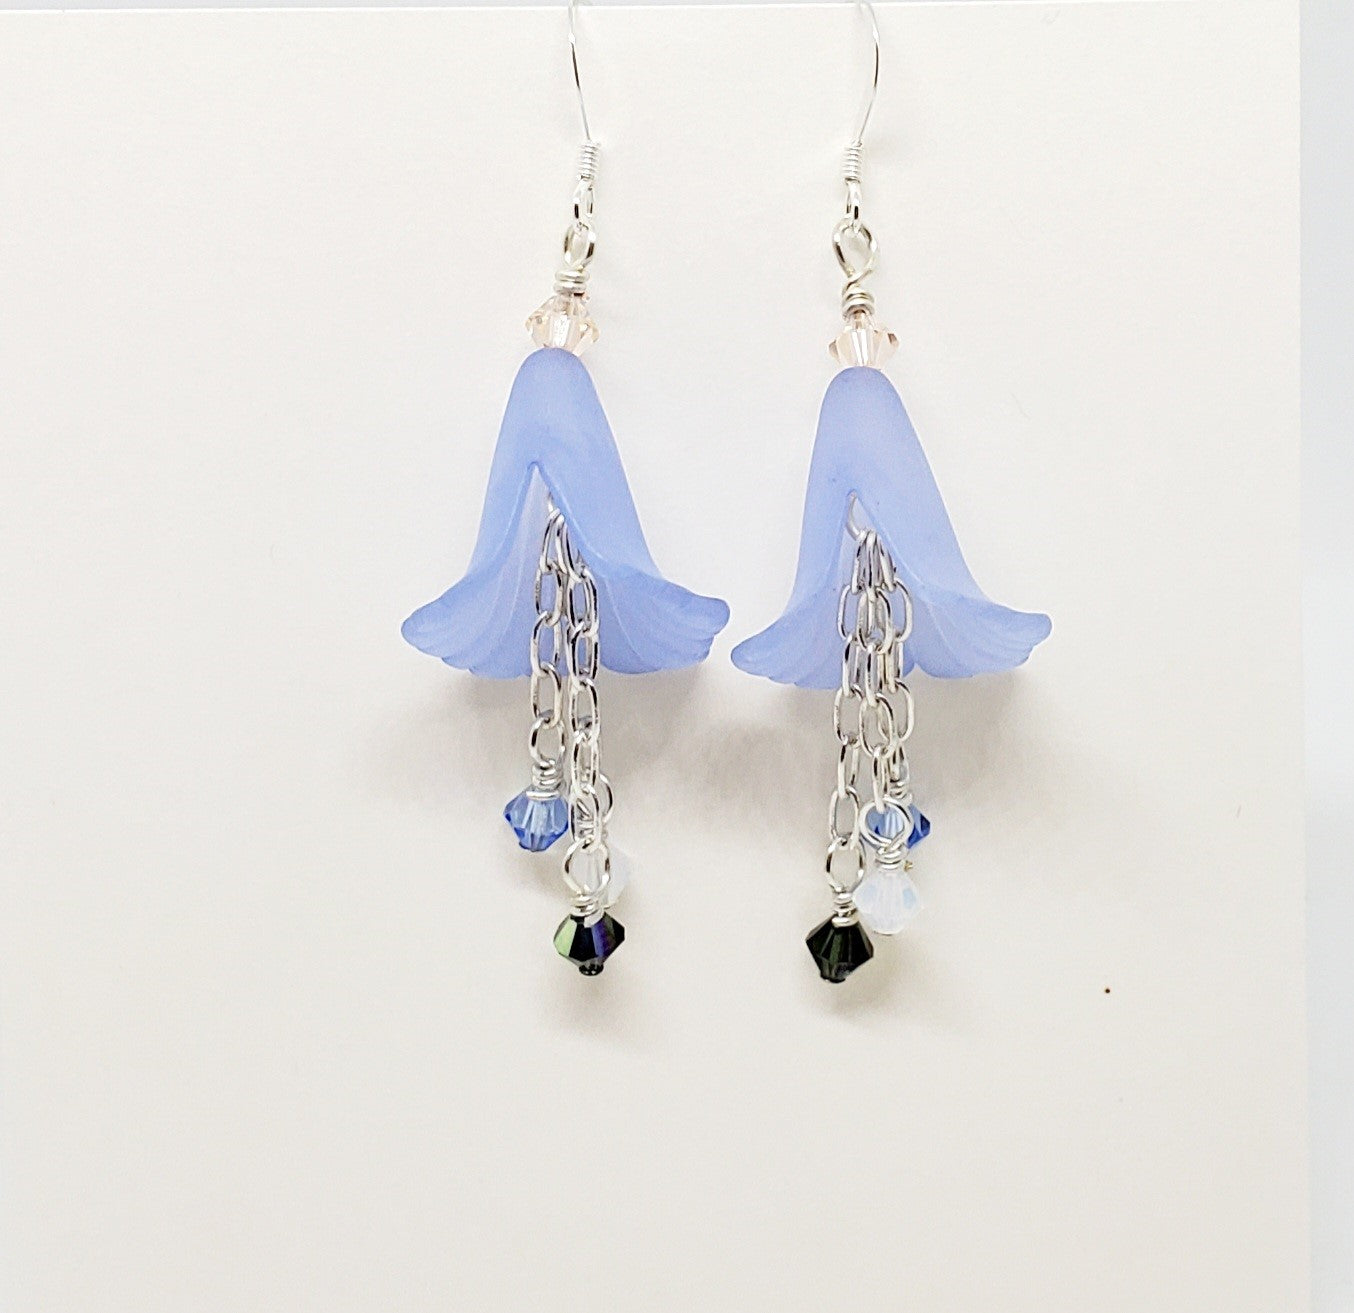 Periwinkle Flower Dangle Earrings with Crystals and Sterling Silver Ear Wires